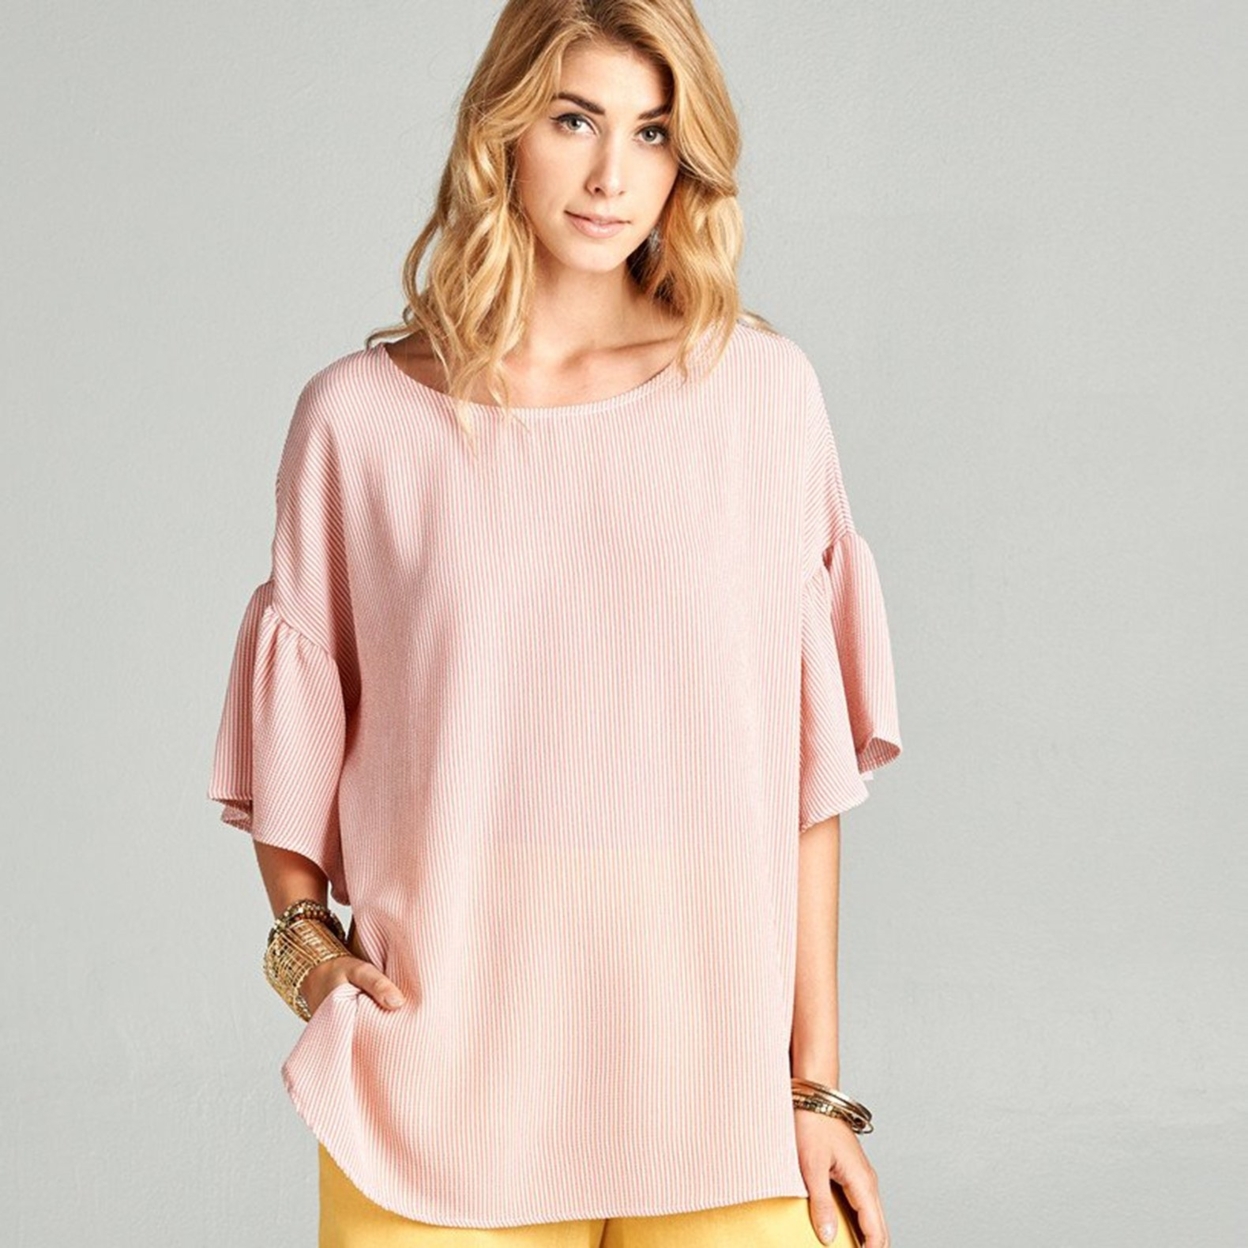 Relaxed Fit Striped Bell Sleeve Top - Blush, Medium (10-14)